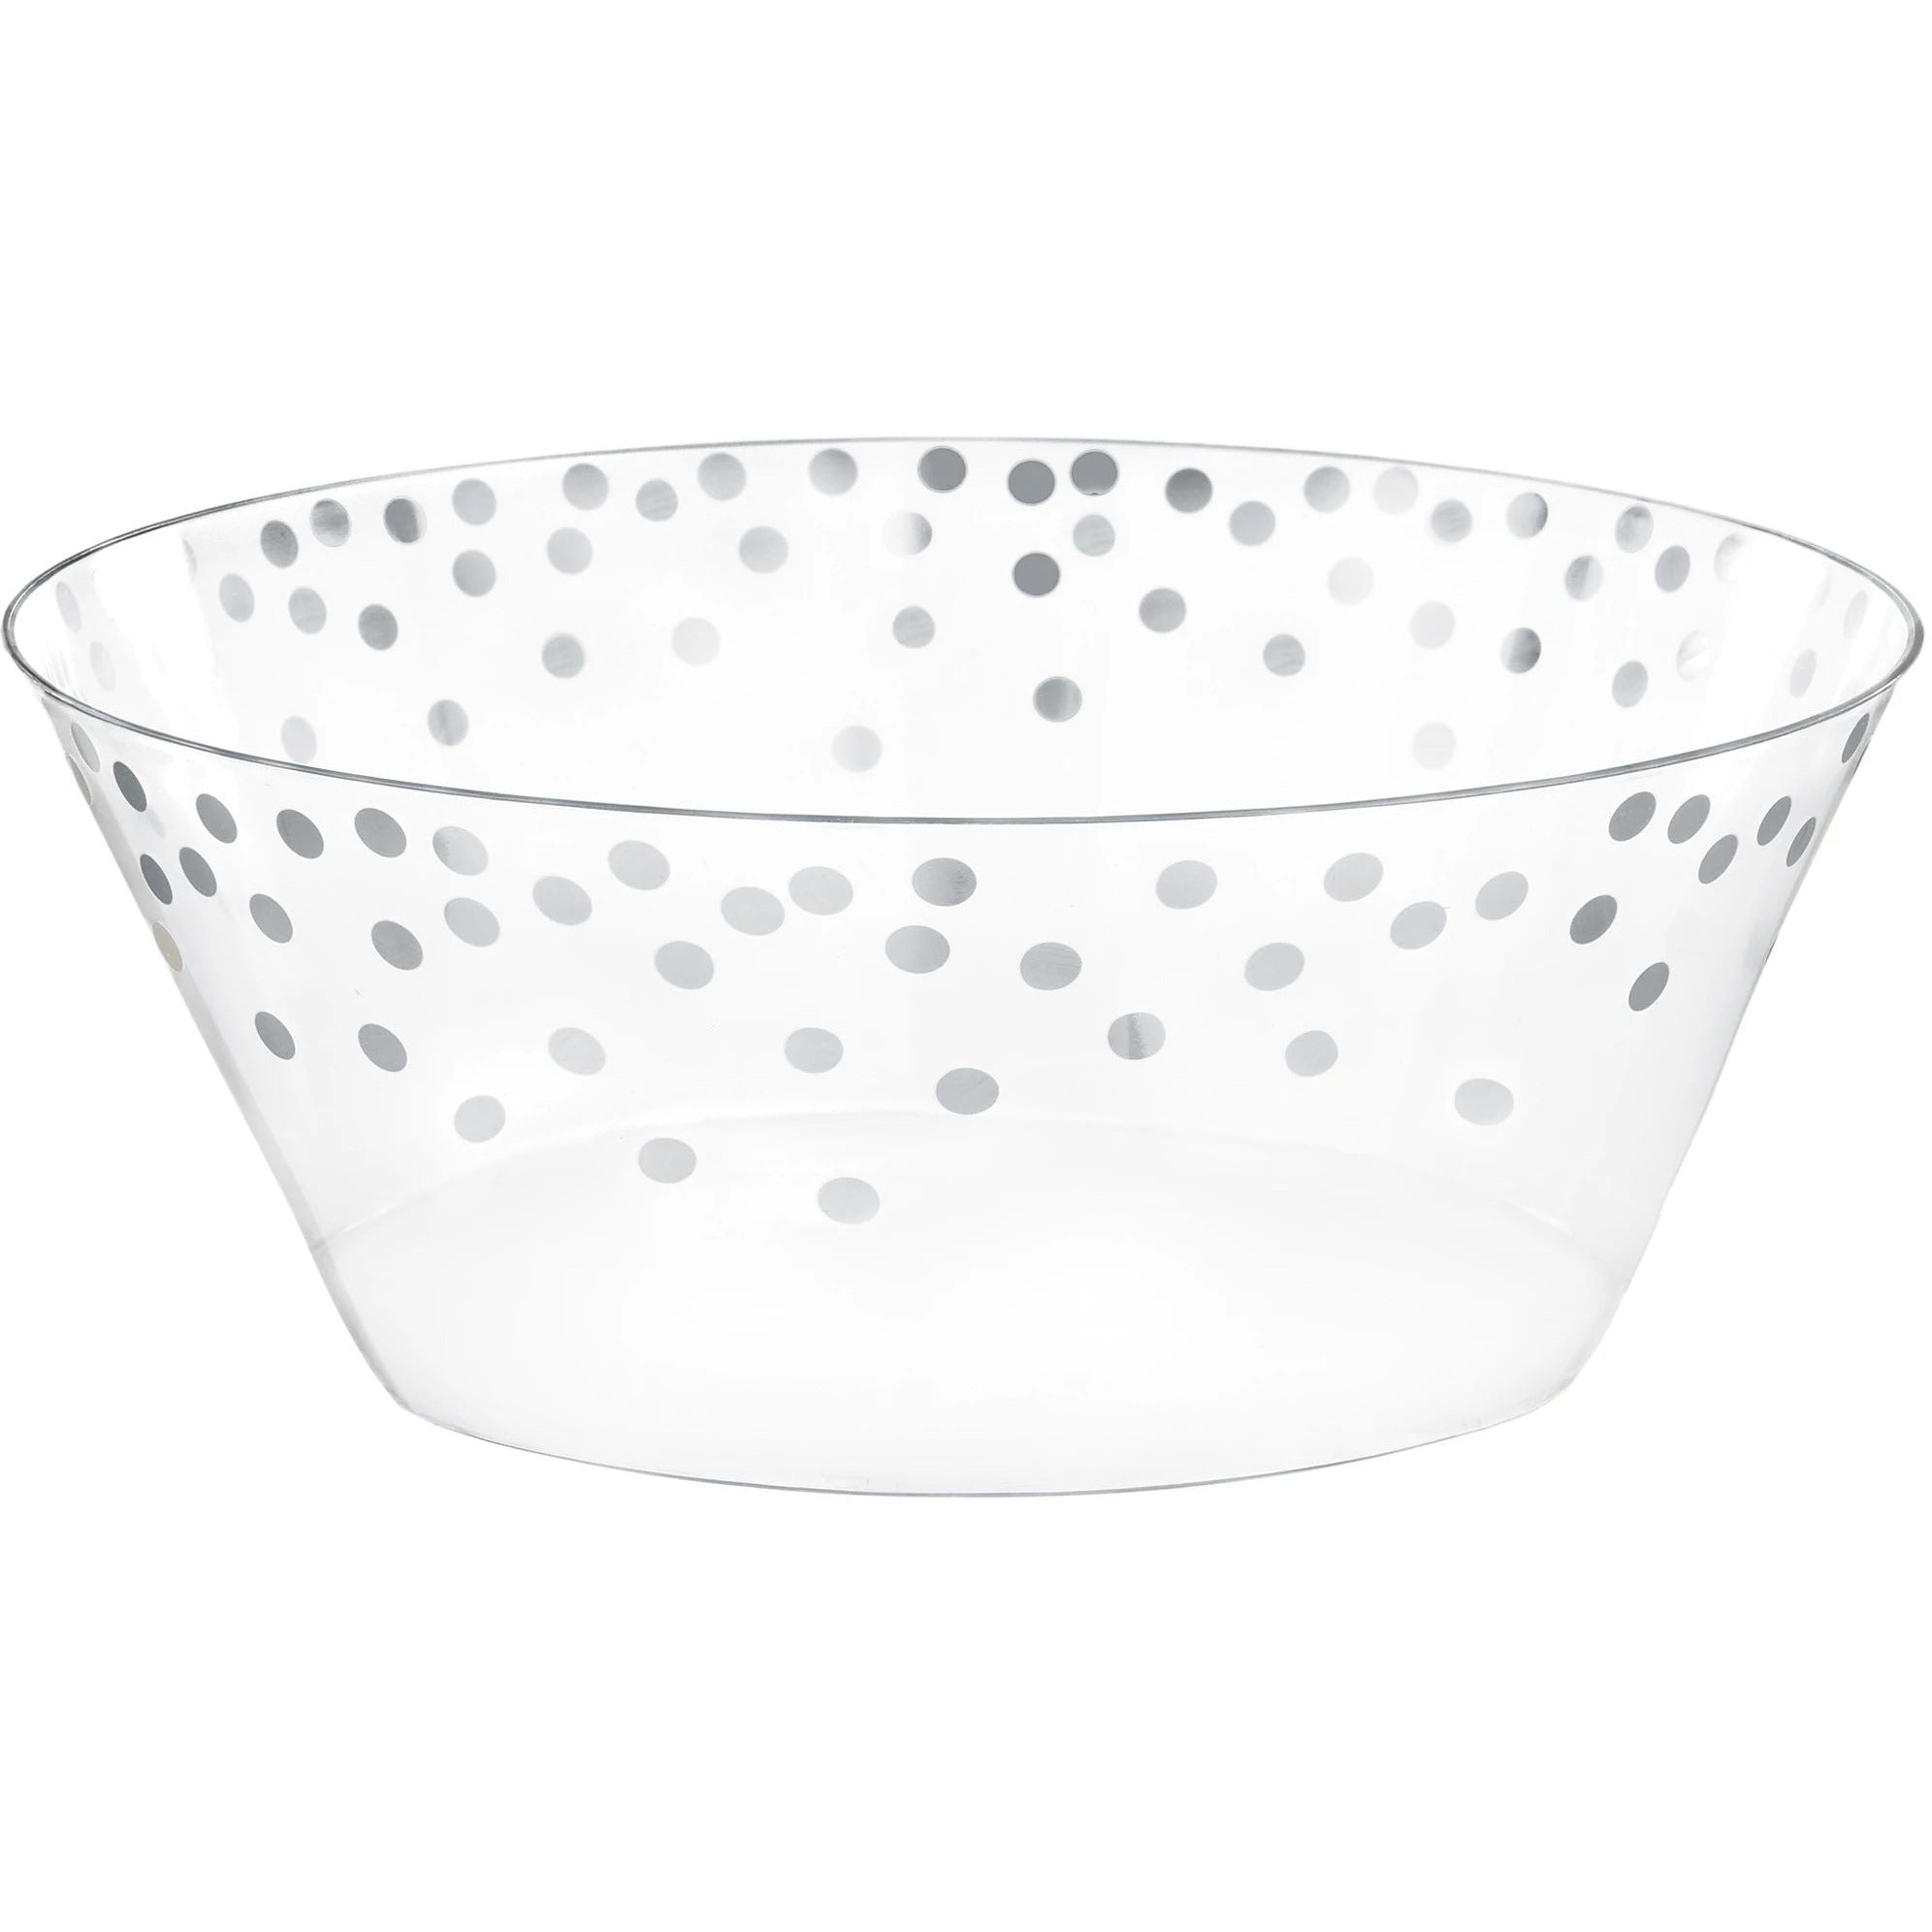 Amscan BASIC Plastic Serving Bowl Small -Silver Dots